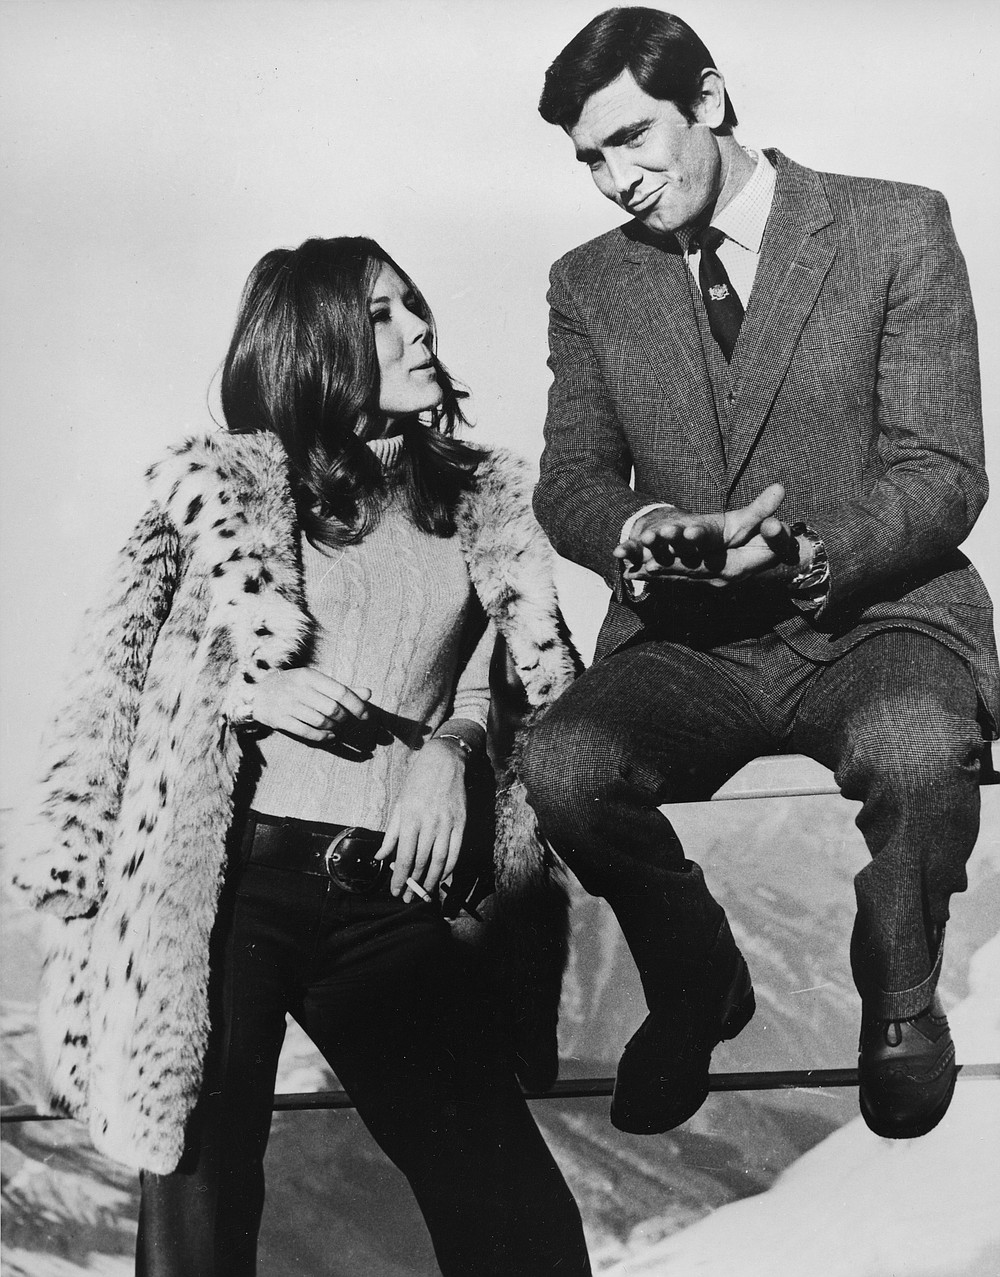 FILE - In this Jan. 10, 1969 file photo, Sean Connery's replacement as James Bond, George Lazenby is pictured with British actress Diana Rigg. The two are captured during takes of "On Her Majesty's Secret Service" at Schilthorn near Muerren, Switzerland. Actress Diana Rigg, who became a 1960s style icon as secret agent Emma Peel in TV series “The Avengers,” has died at age 82. Rigg’s agent Simon Beresford says she died Thursday Sept. 10, 2020 at home with her family. (AP Photo/Bob Dear, File)